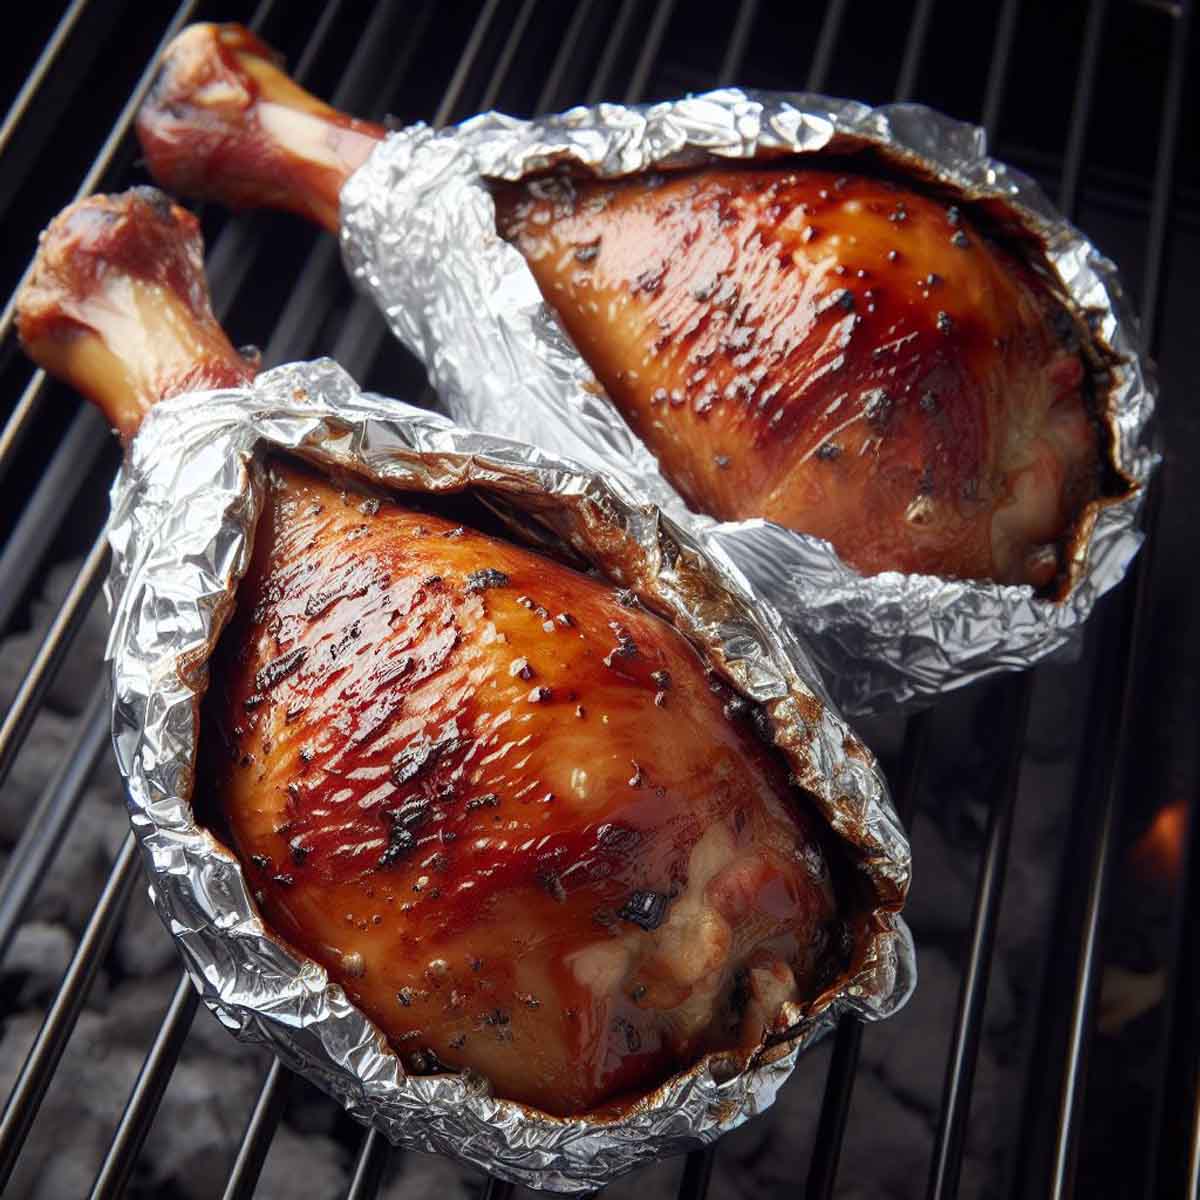 Foil-wrapped smoked turkey legs on a grill, with steam visible, indicating moist and tender meat inside.